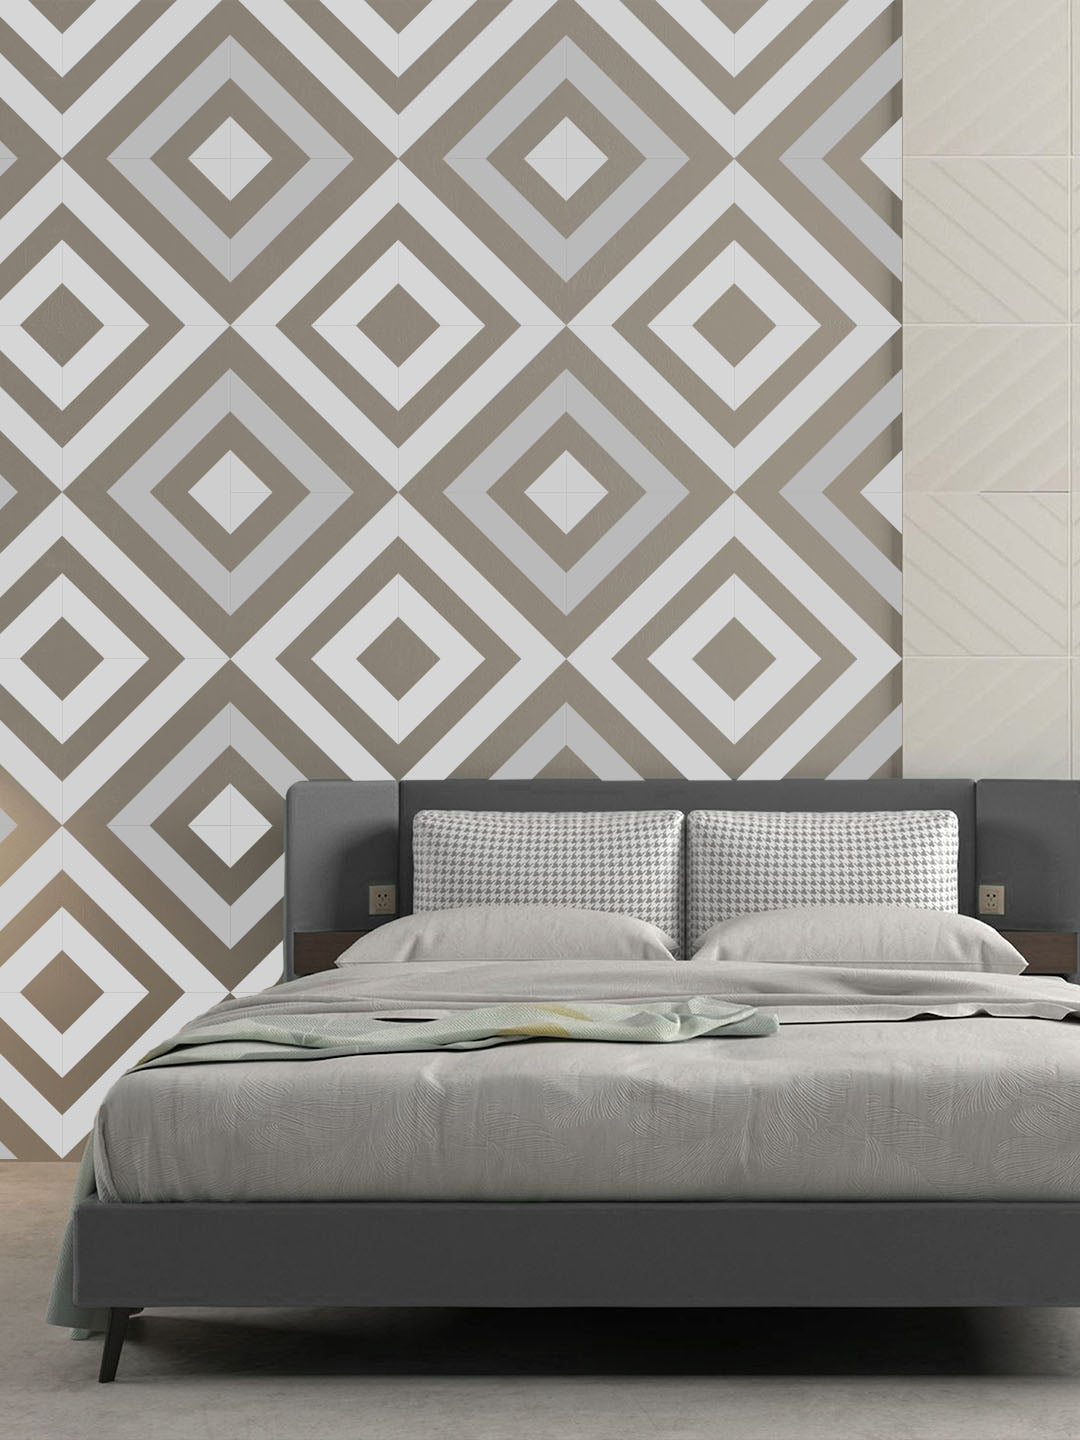 Geometric Pattern Design Stencil for Wall Painting (KDMD1419)